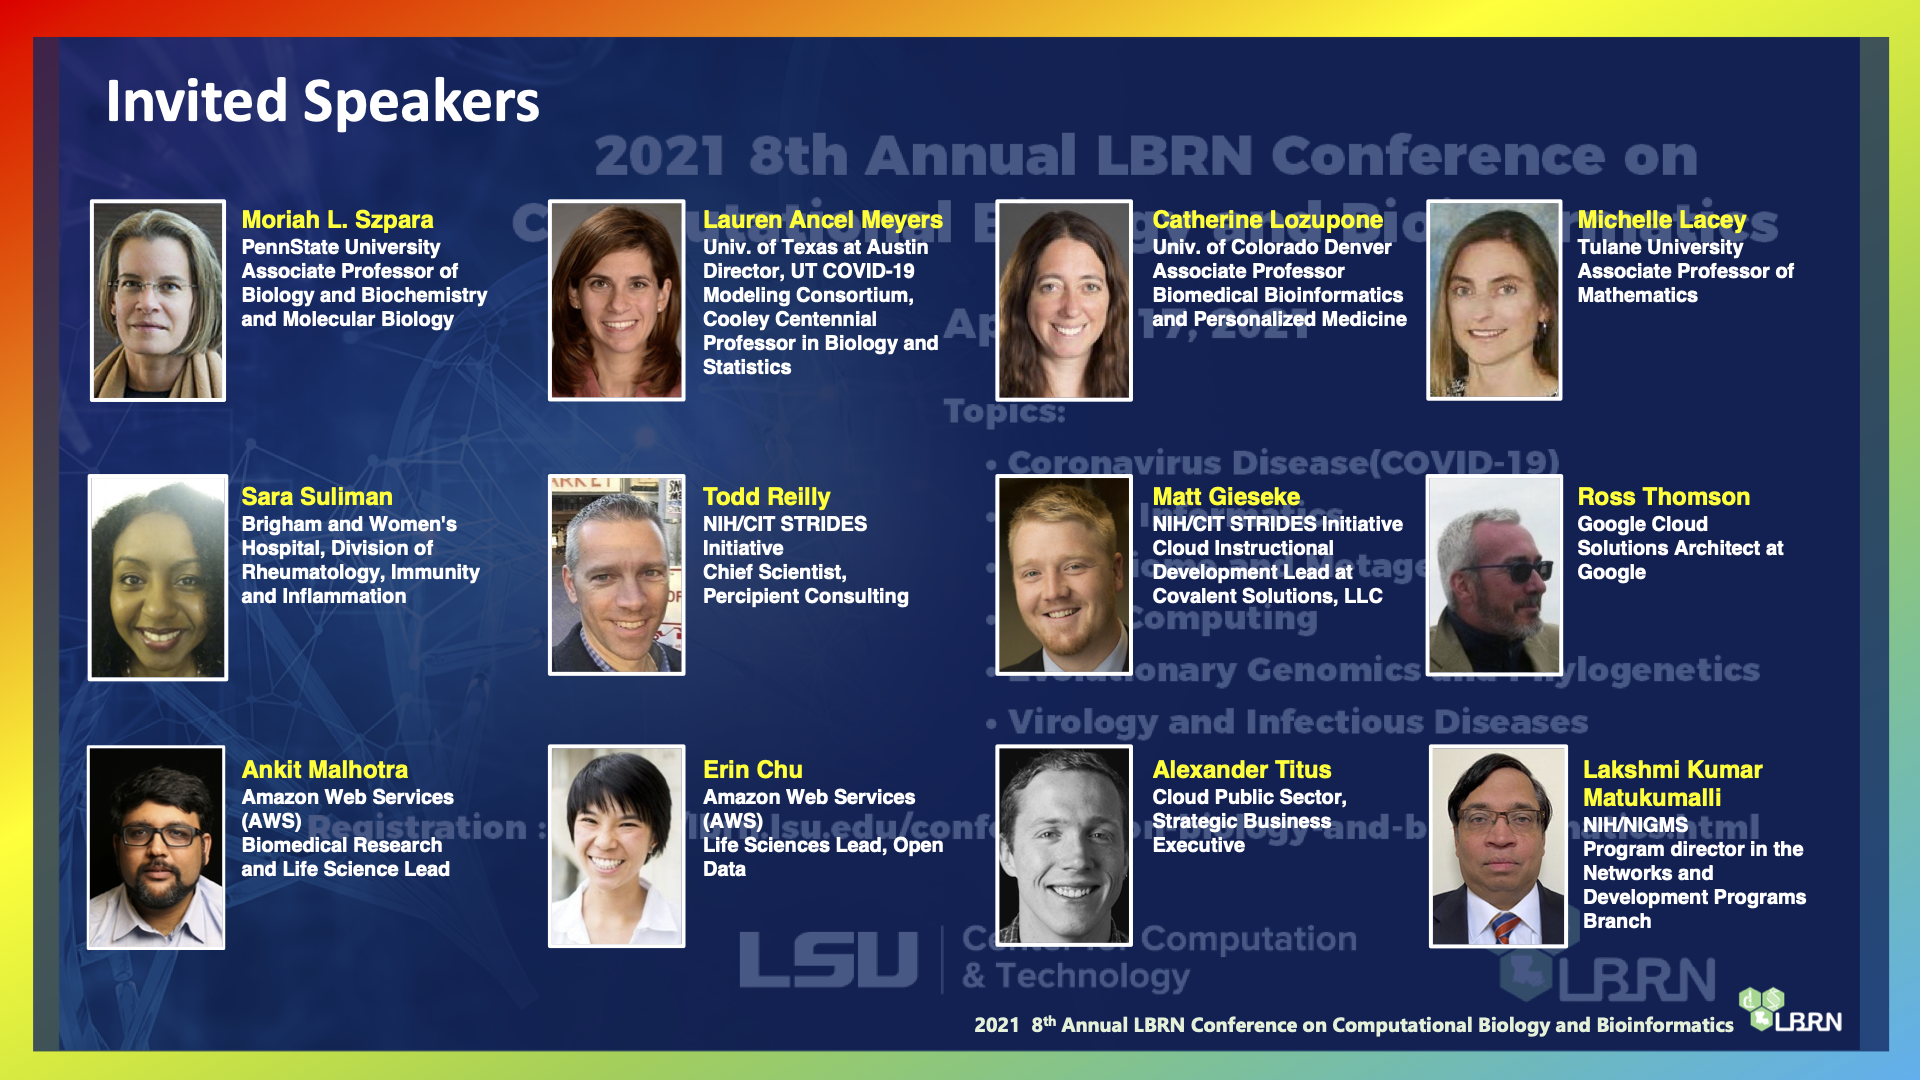 2021 8th Annual LBRN Conference on Computational Biology and Bioinformatics Flier (2021-04-08)